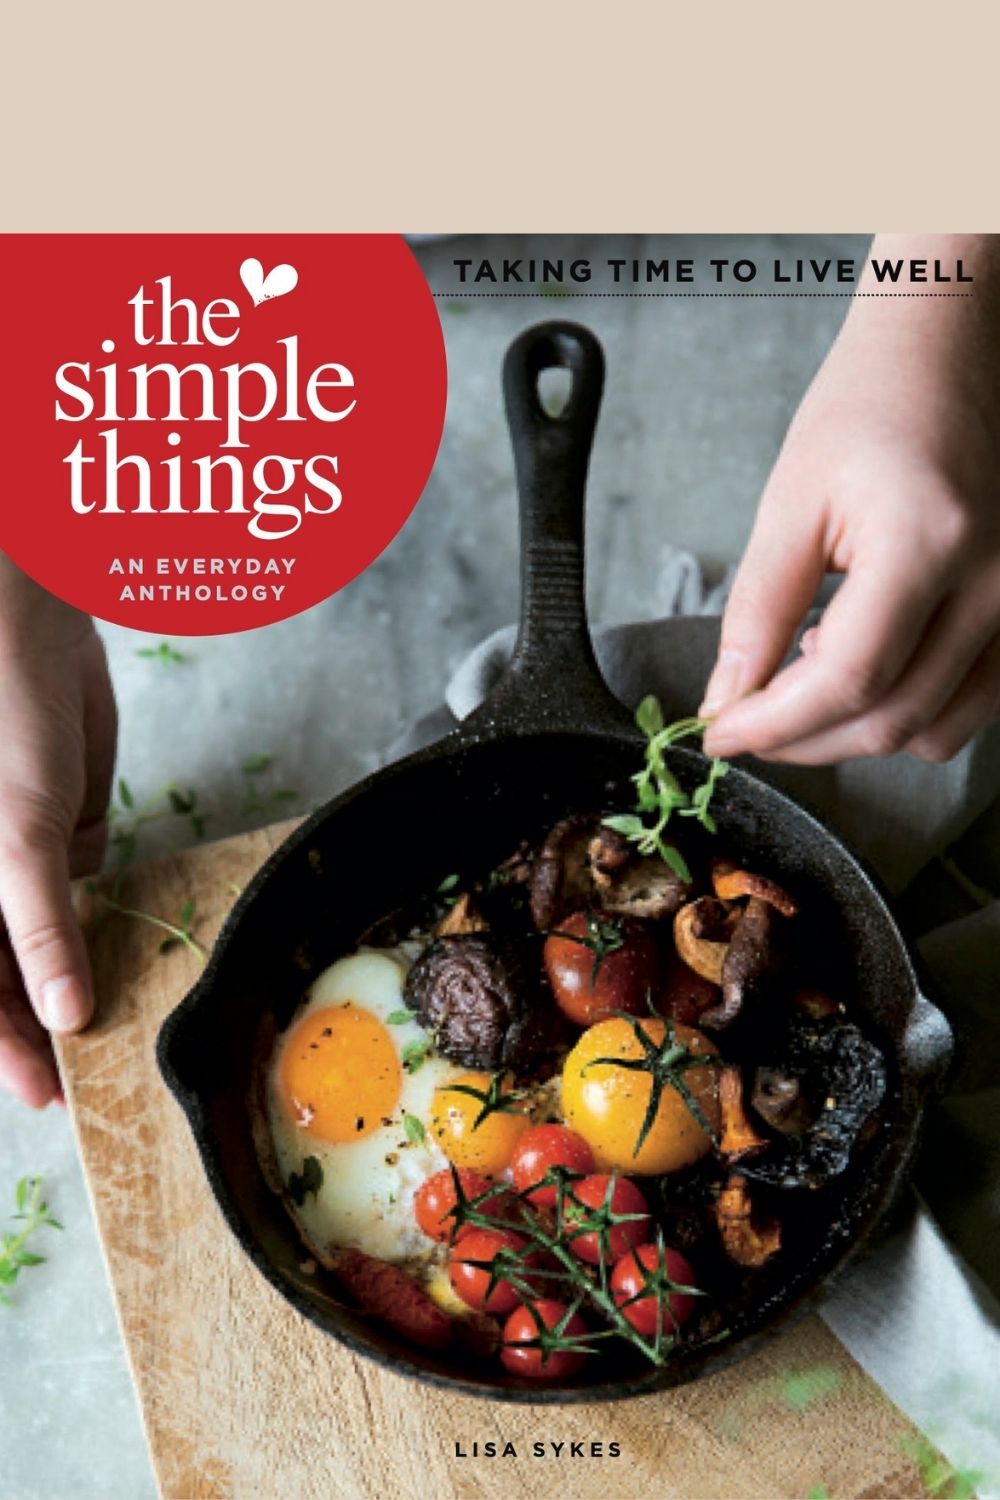 The Simple Things Anthology Volume 3: An Everyday Anthology